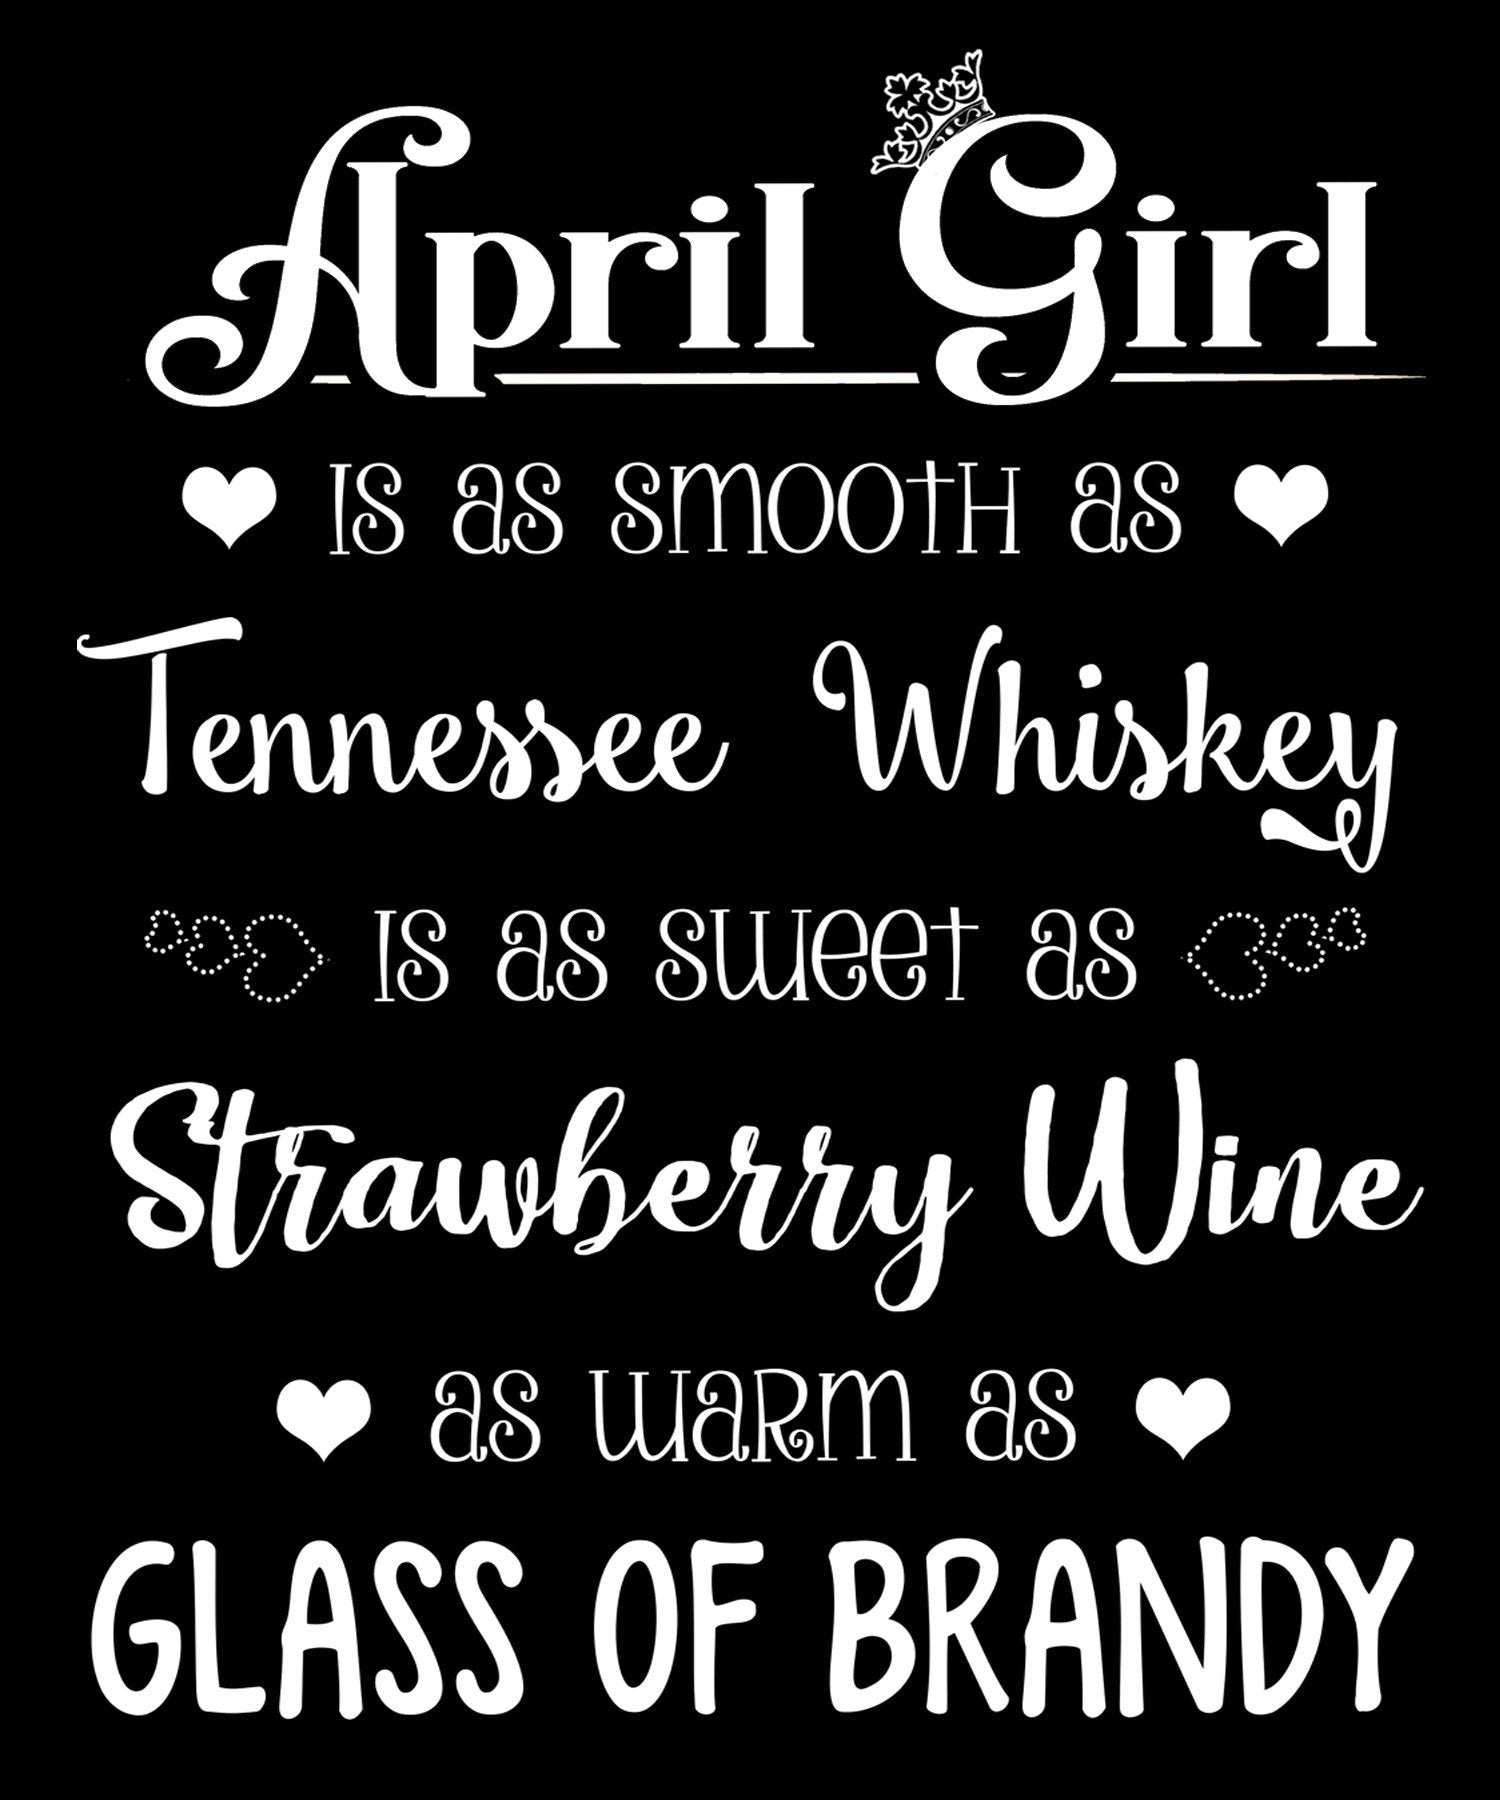 "April Girl Is As Smooth As Whiskey.........As Warm As Brandy"